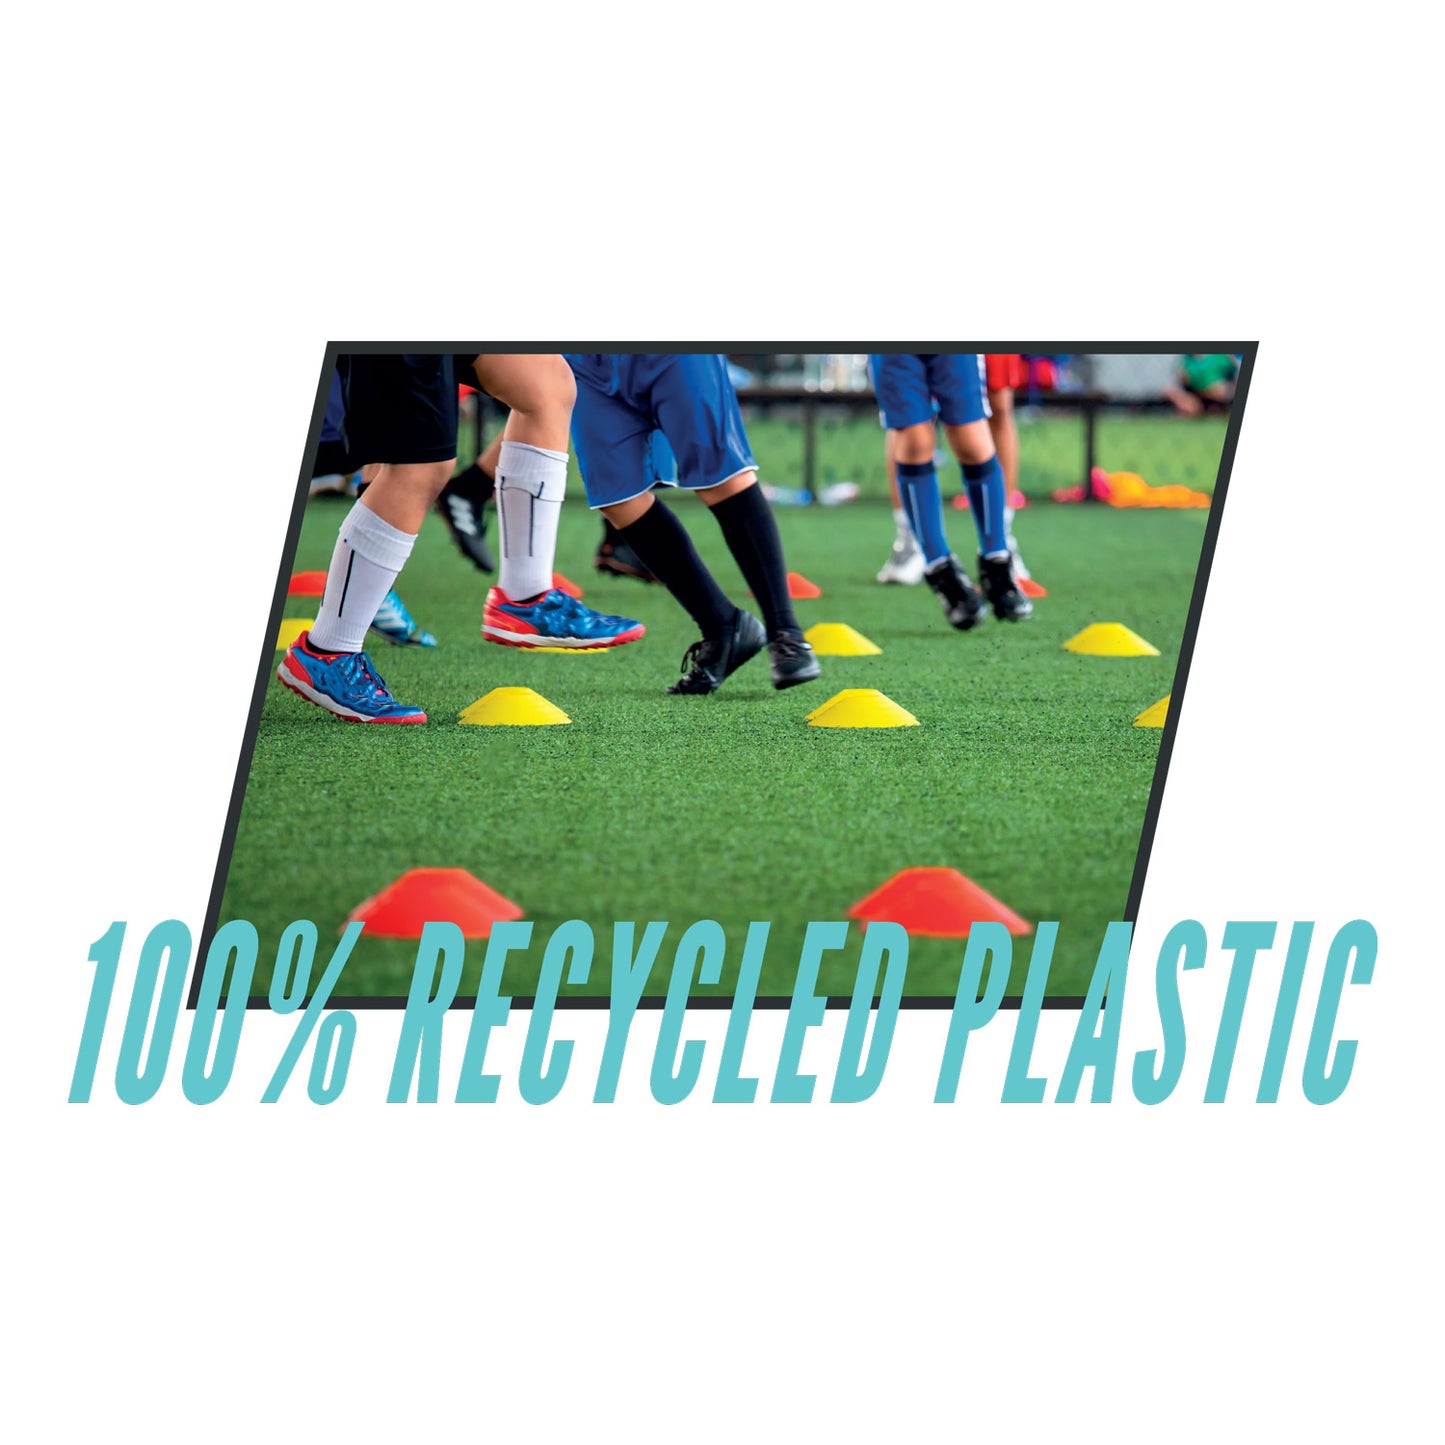 Lionstrike Football / Sports Cones Set – made from 100% recycled plastic